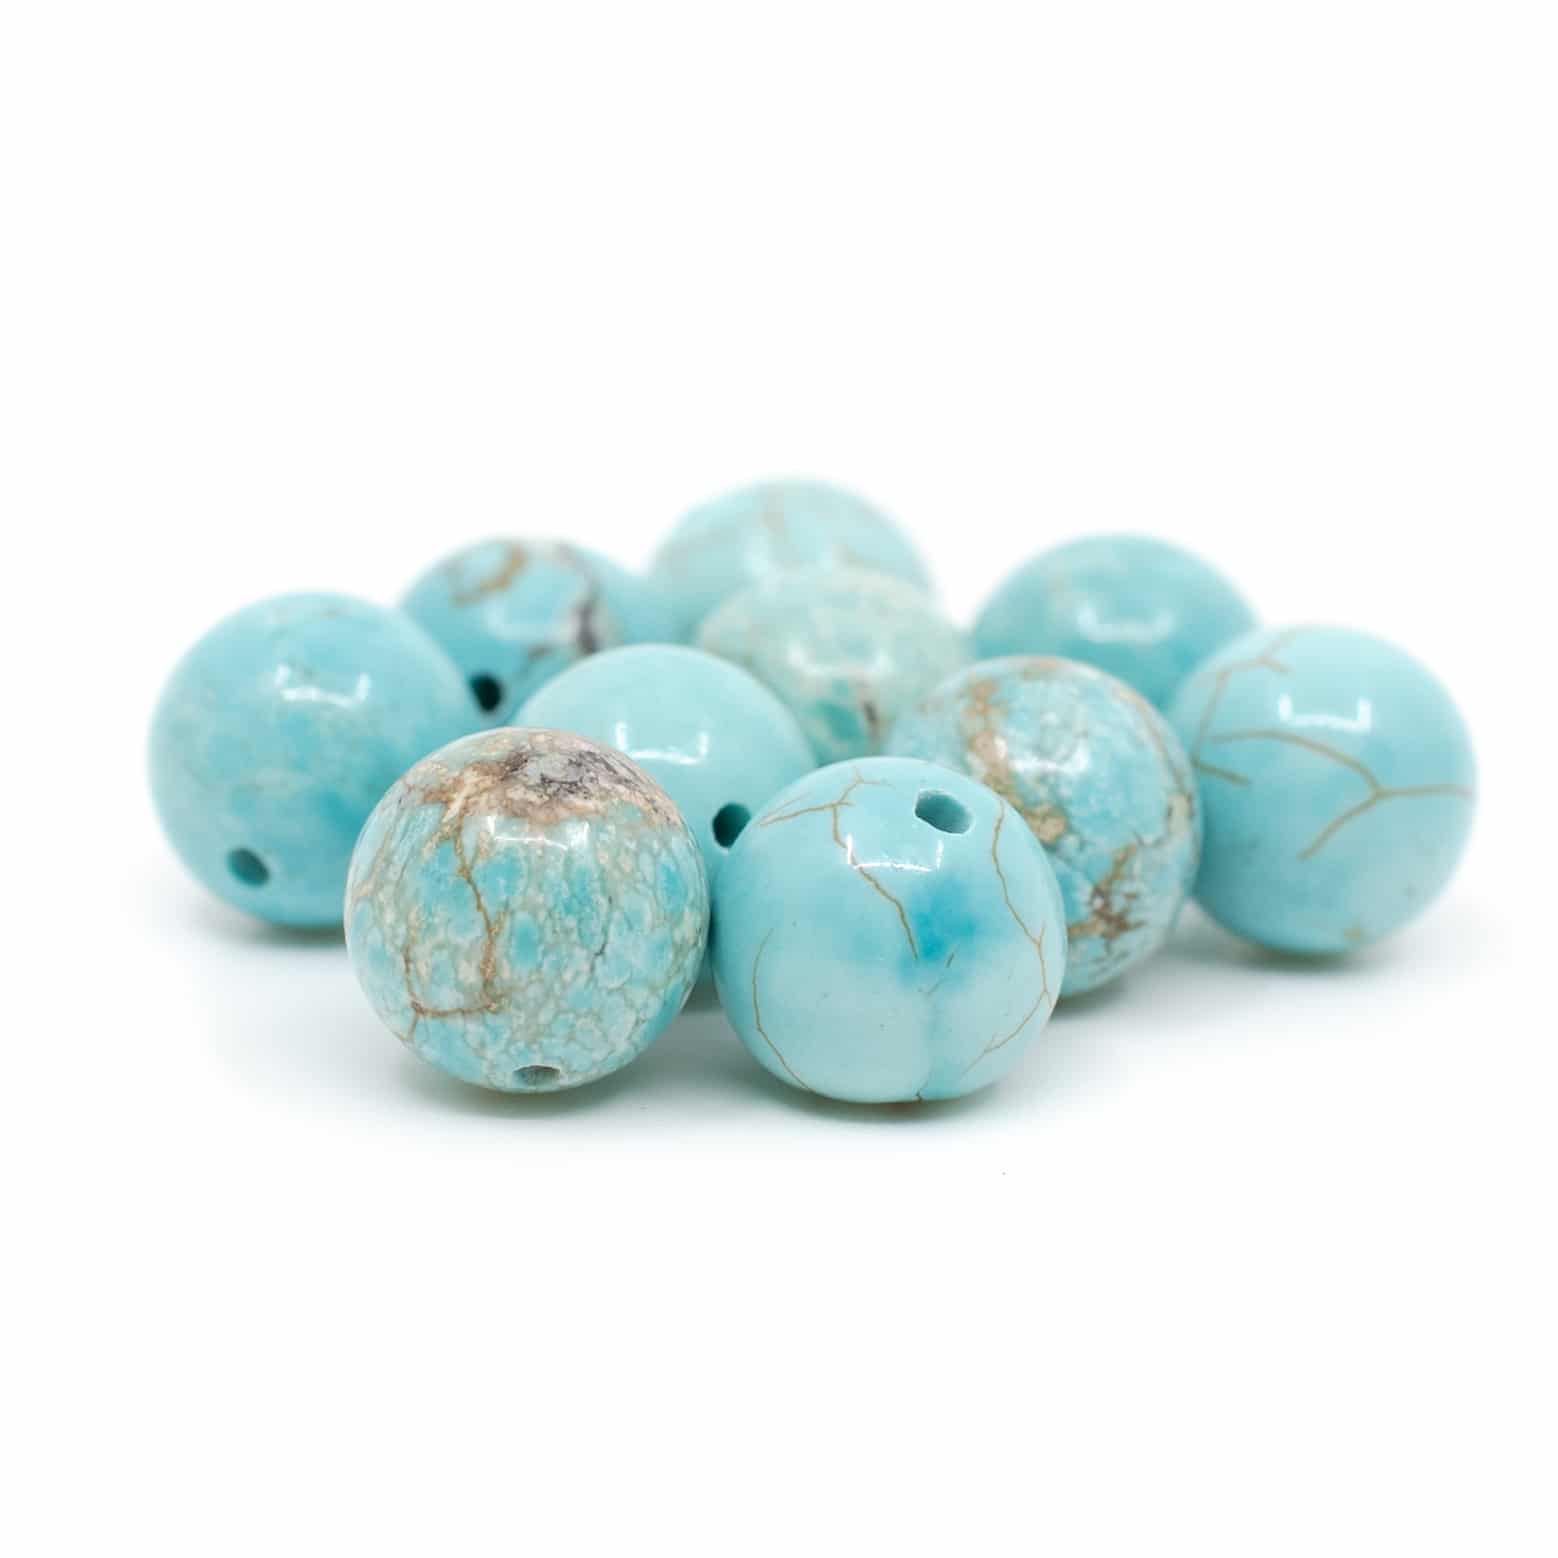 Gemstone Loose Beads Turquoise - 10 pieces (10 mm)